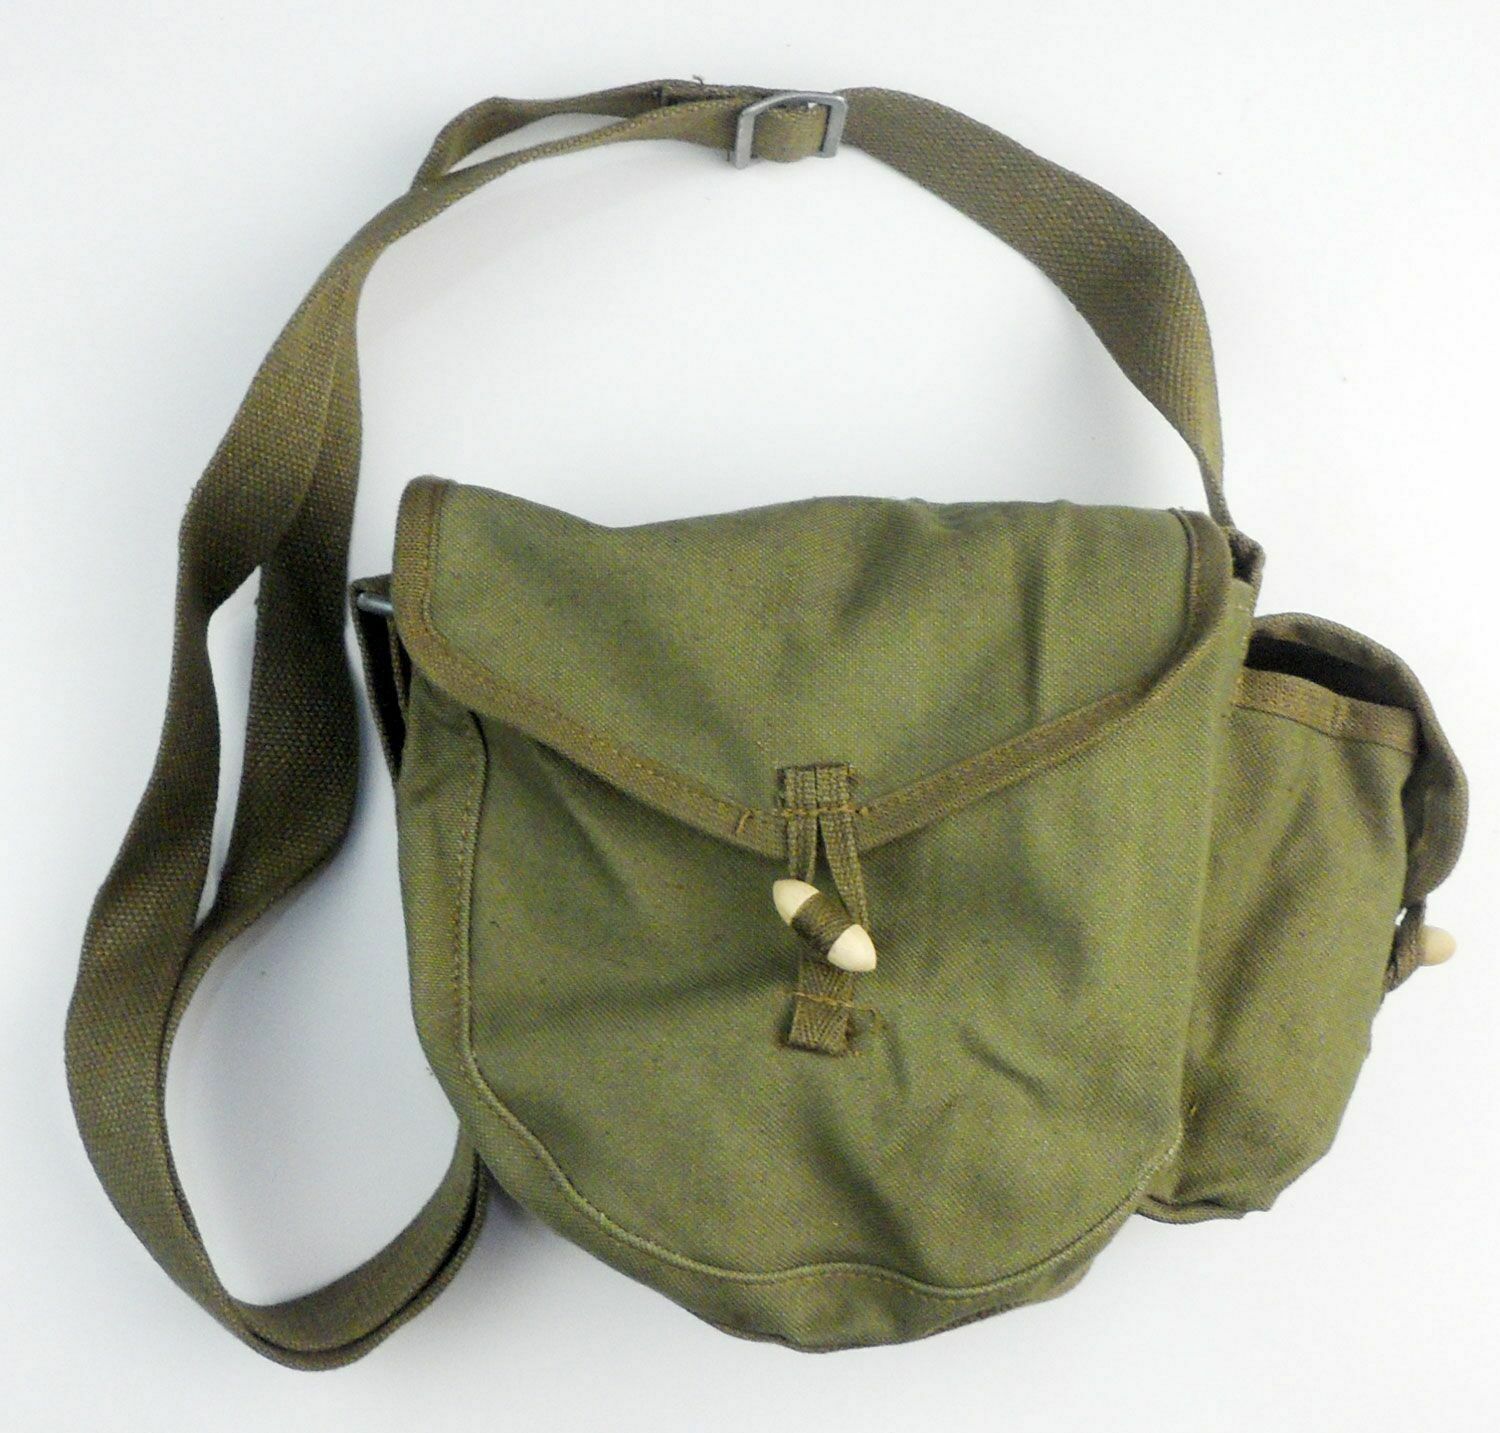 Chinese army canvas drum ammo pouch bag PLA military ammunition communist soviet - £14.22 GBP - £35.55 GBP